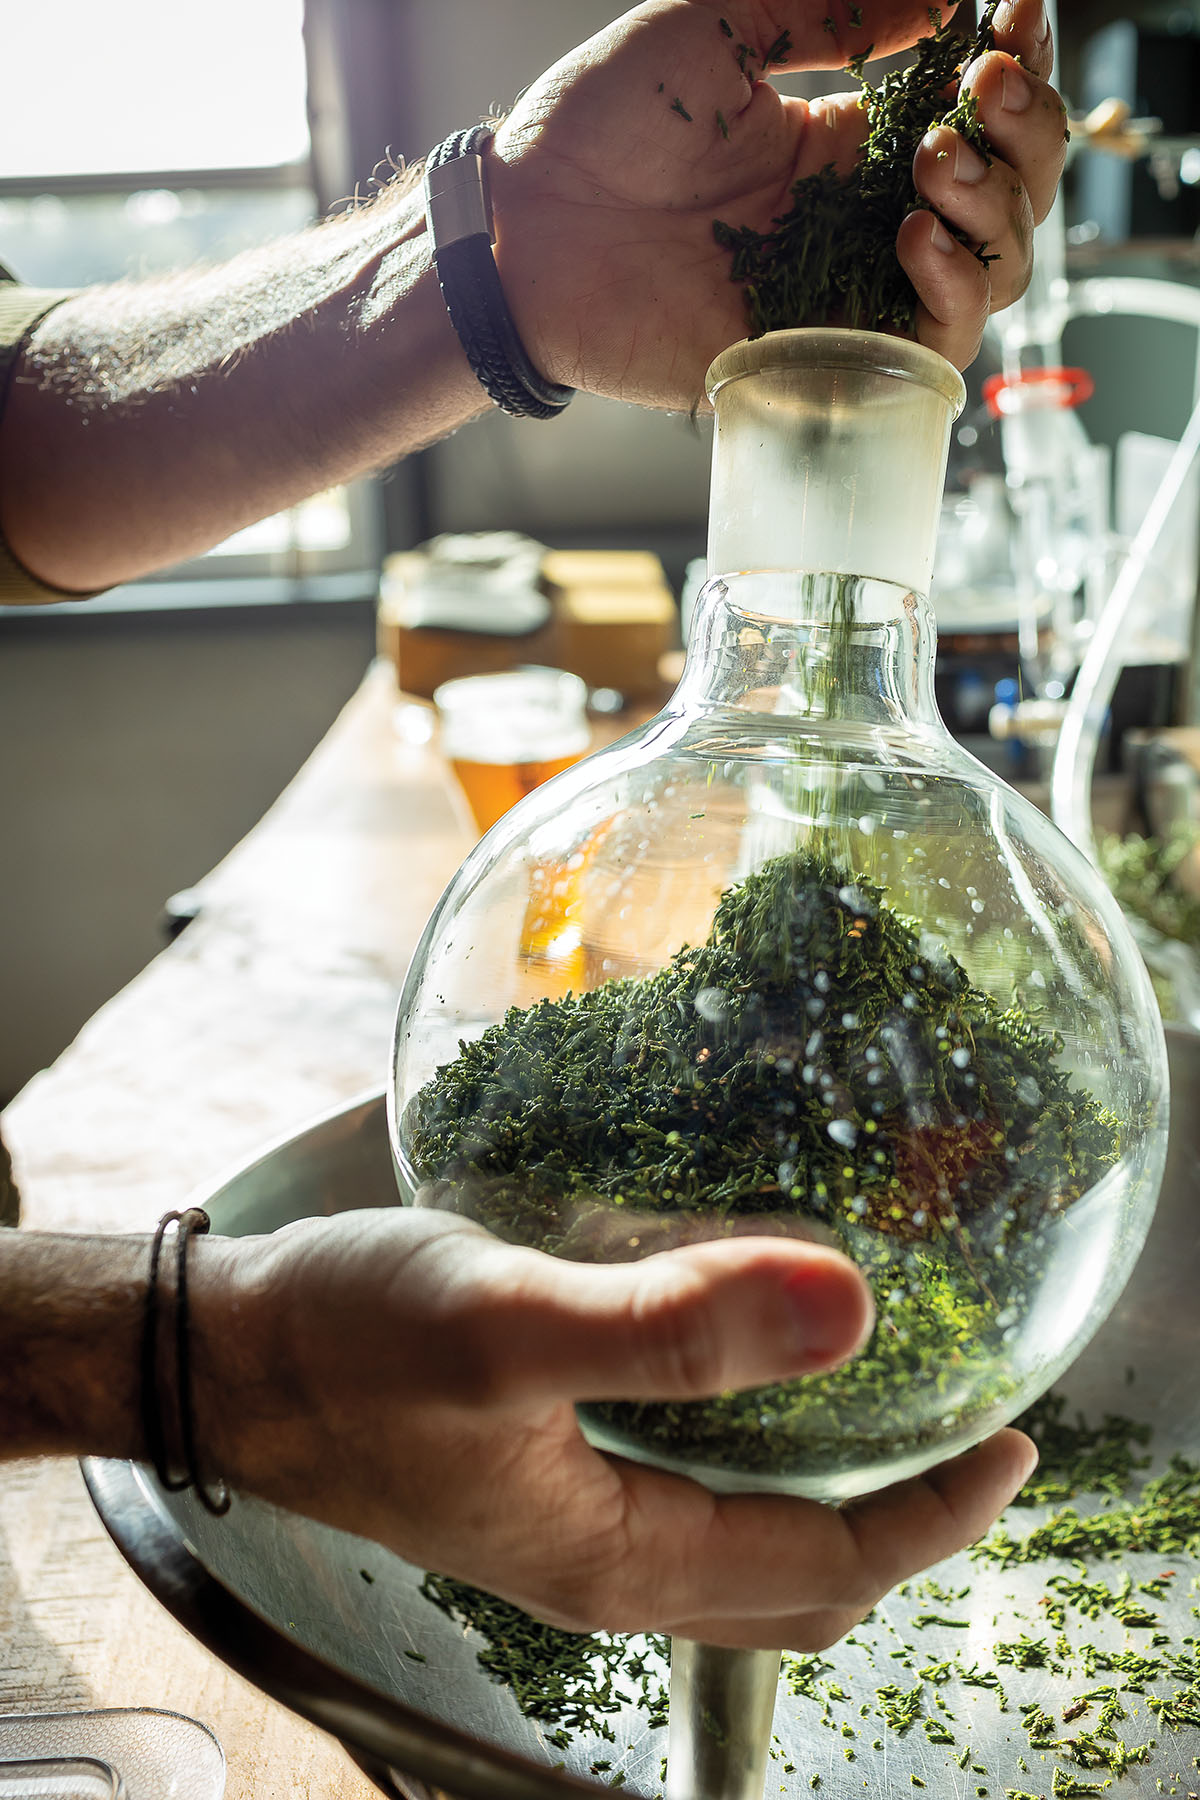 A person's hands put green plant matter into a large glass apparatus